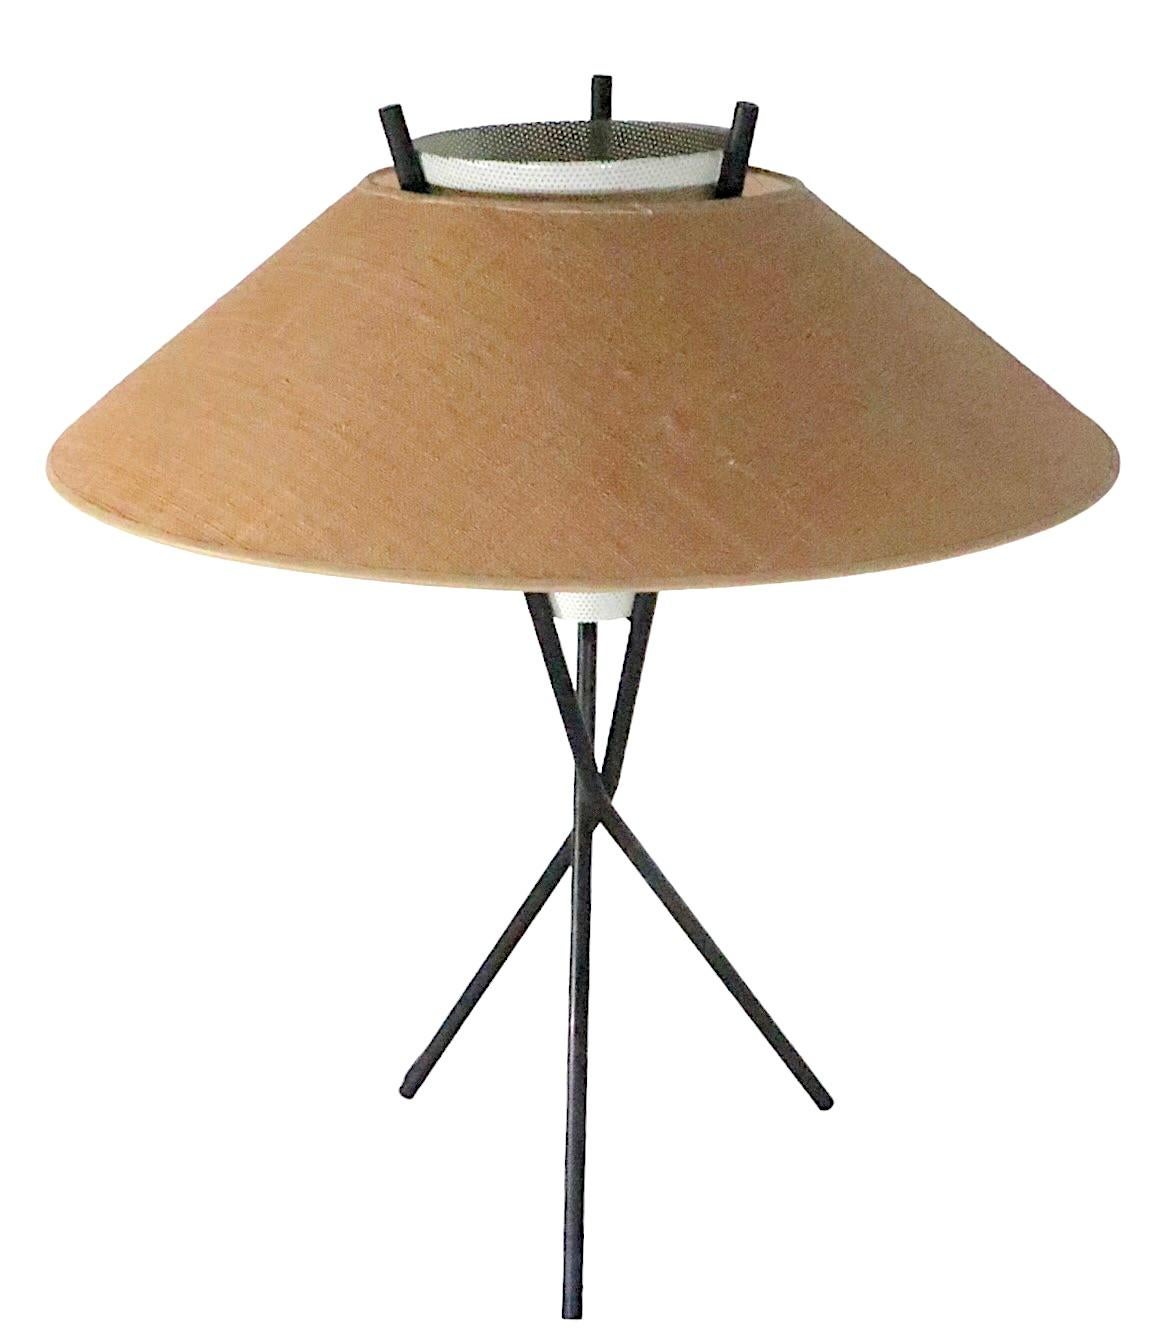 20th Century Midcentury Tri Pod Table Lamp by Gerald Thurston for Lightolier C 1950s For Sale